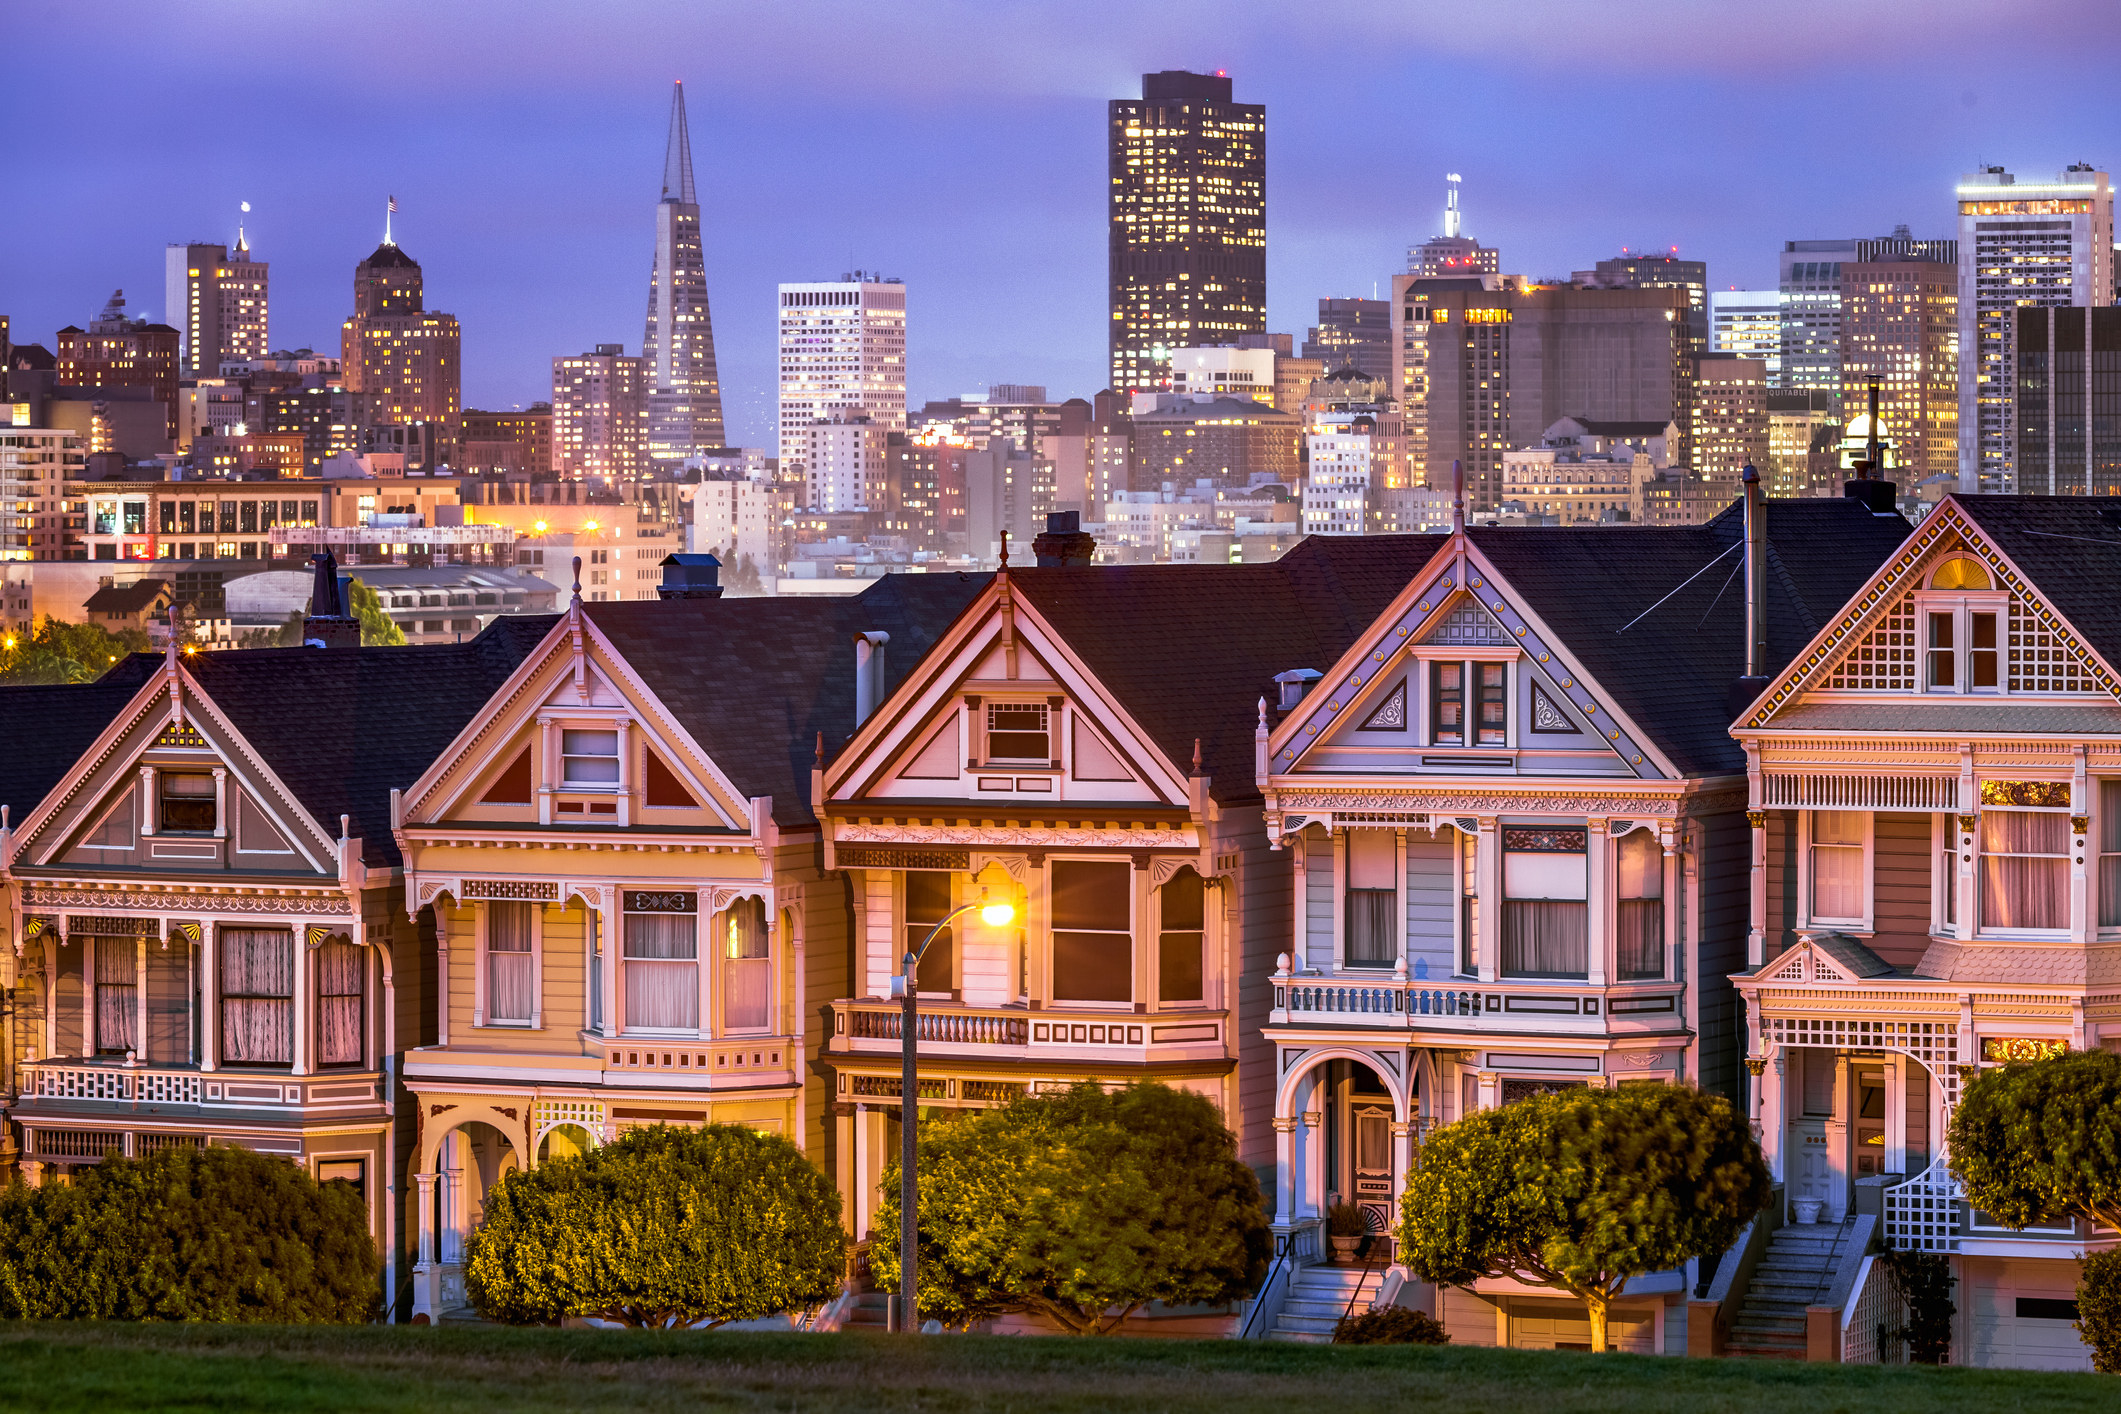 A row of houses in San Francisco.